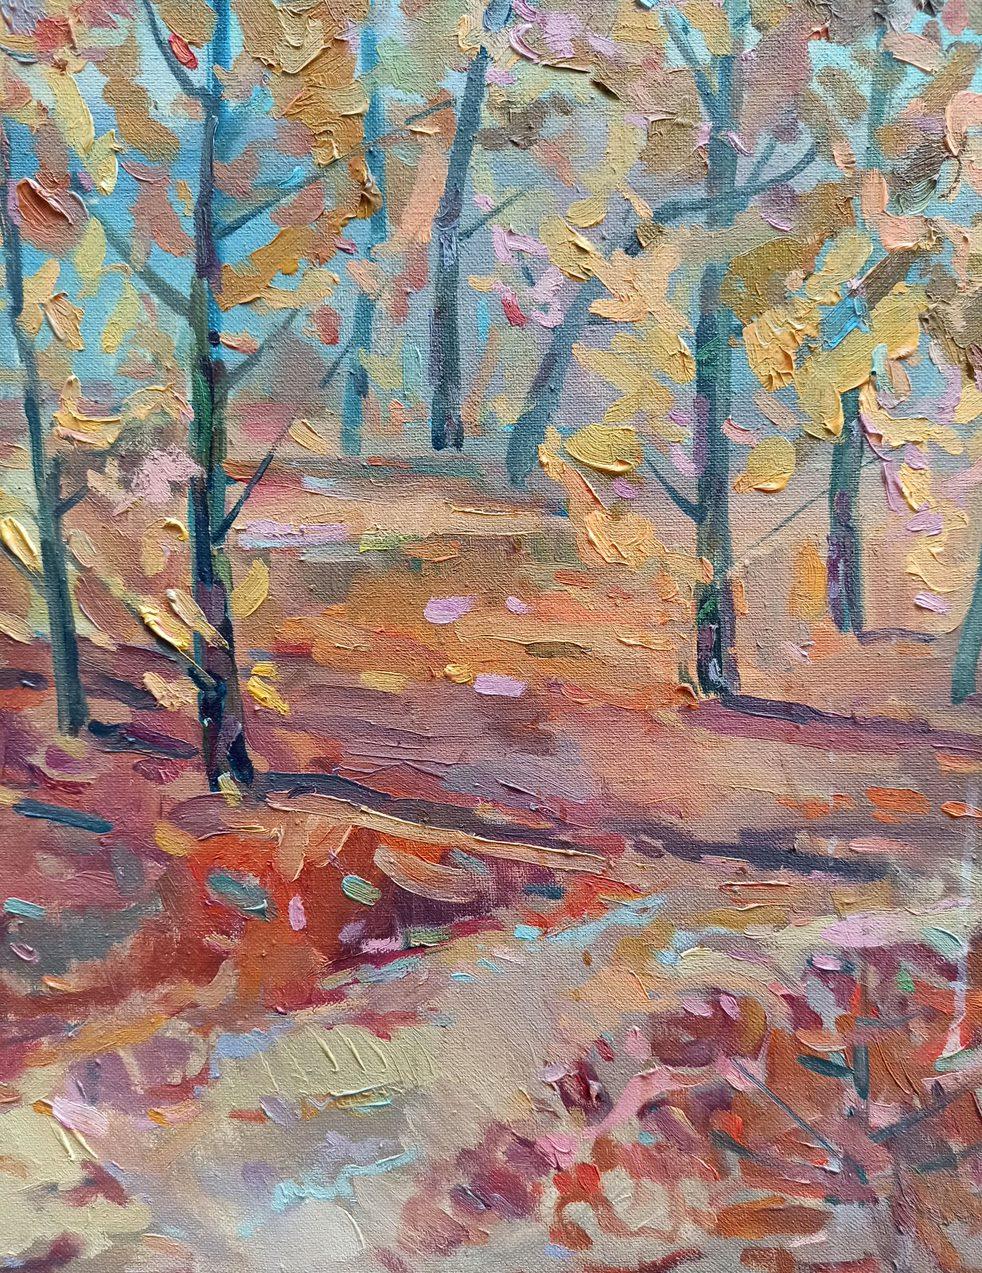 Artist: Peter Tovpev
Work: Original oil painting, handmade artwork, one of a kind 
Medium: Oil on Canvas 
Year: 2010
Style: Impressionism
Title: Autumn Sunny Day
Size: 31.5